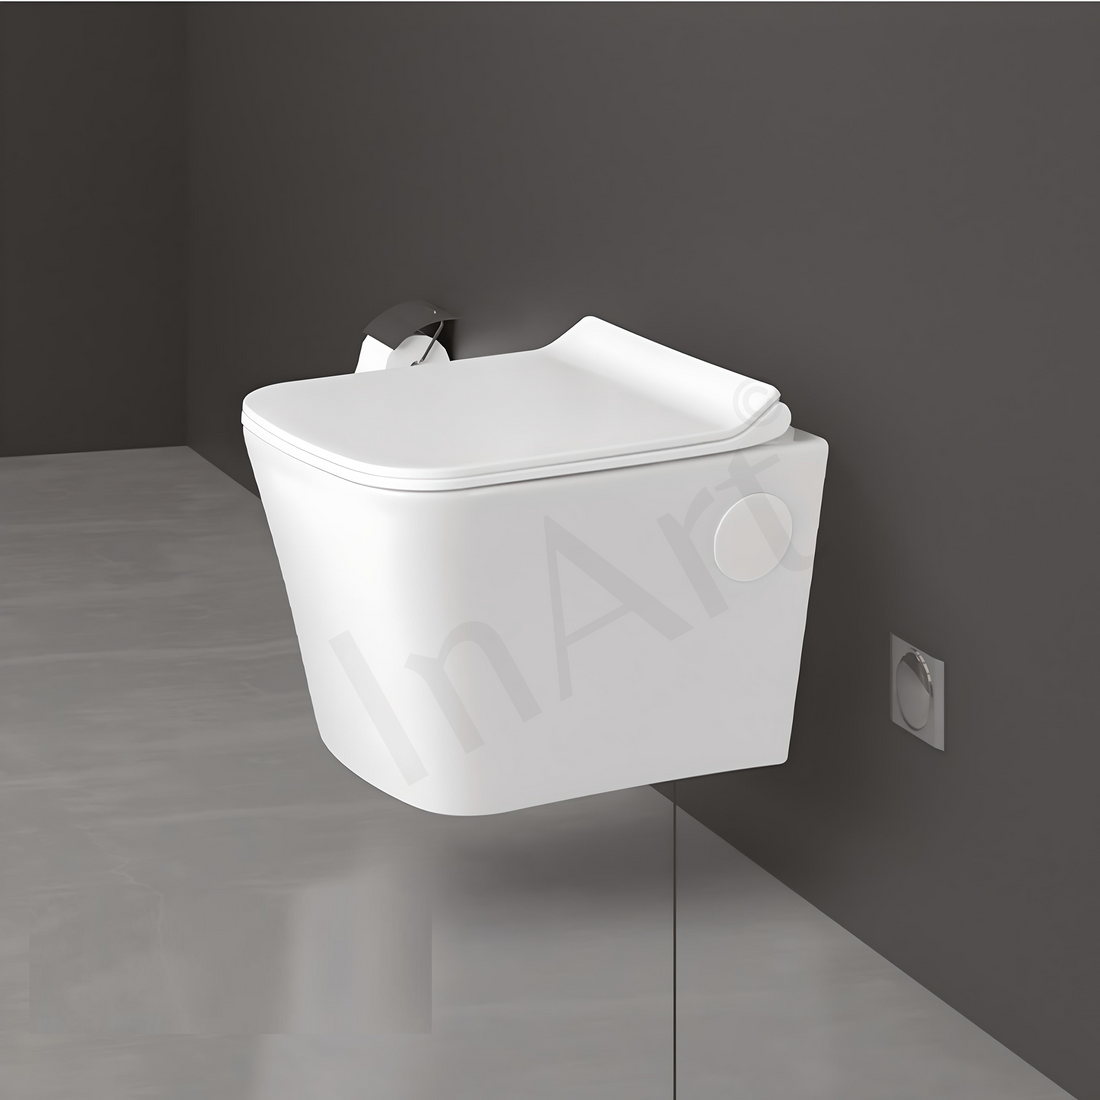 InArt Rimless Ceramic Wall-Hung Toilet - White, Soft Close Seat Cover, P Trap Outlet - InArt-Studio